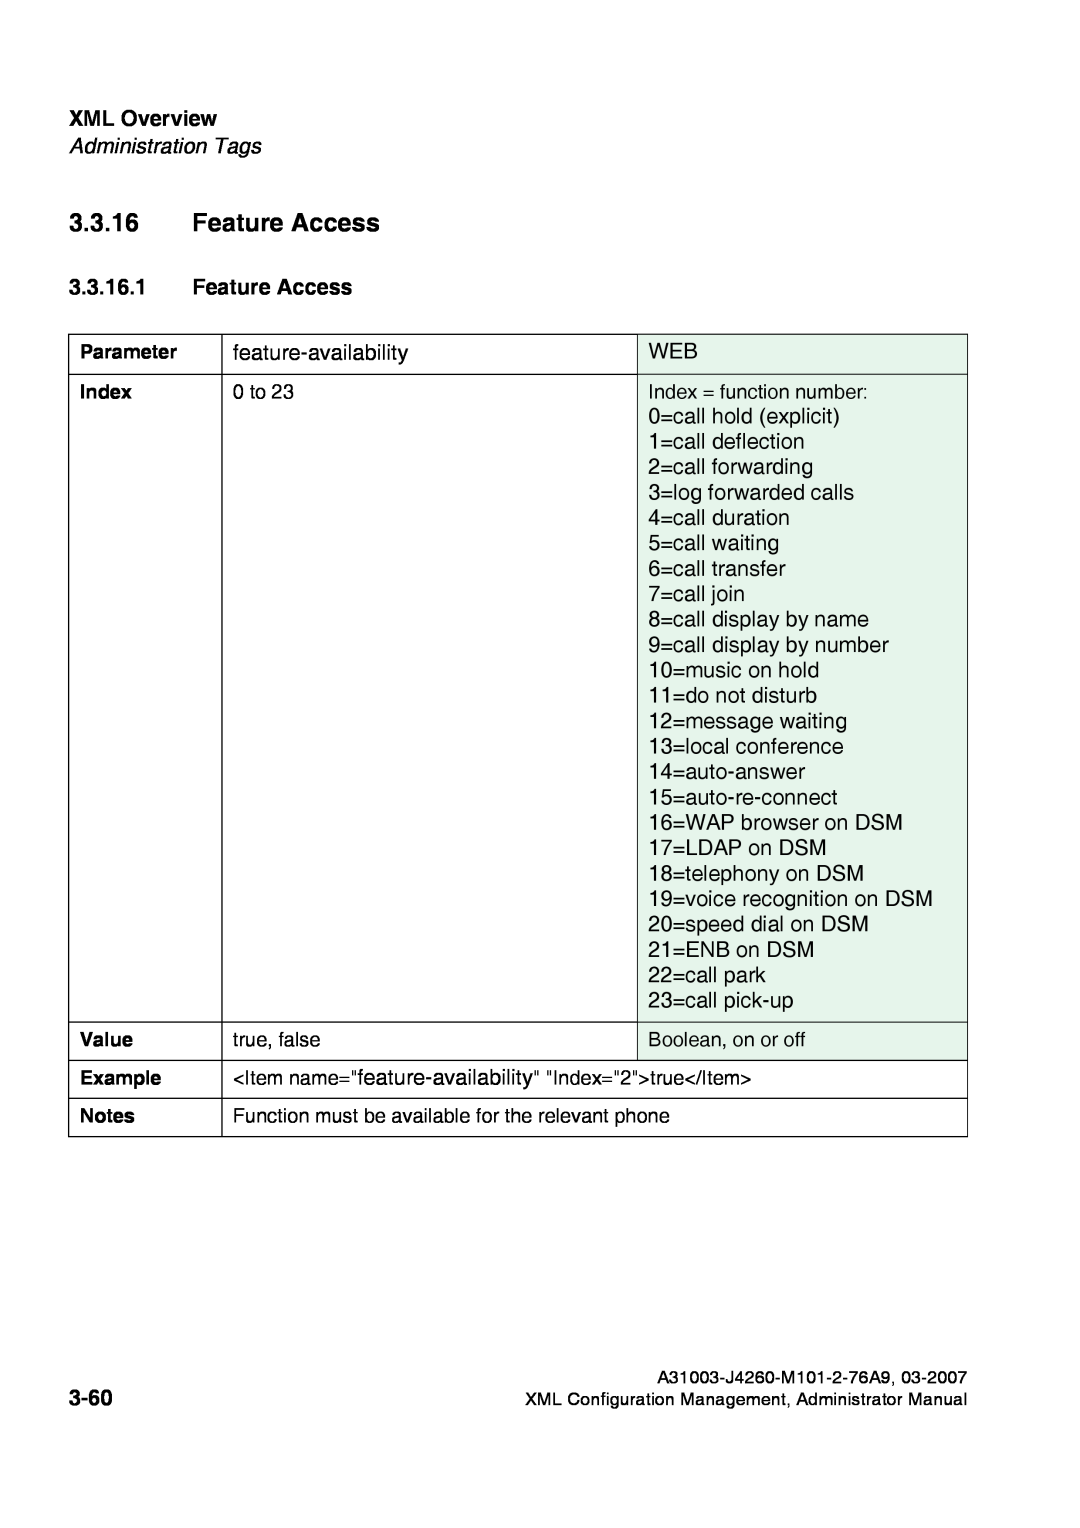 Siemens 420 S V6.0, 410 S V6.0 manual Feature Access, 3-60, XML Overview, Administration Tags 